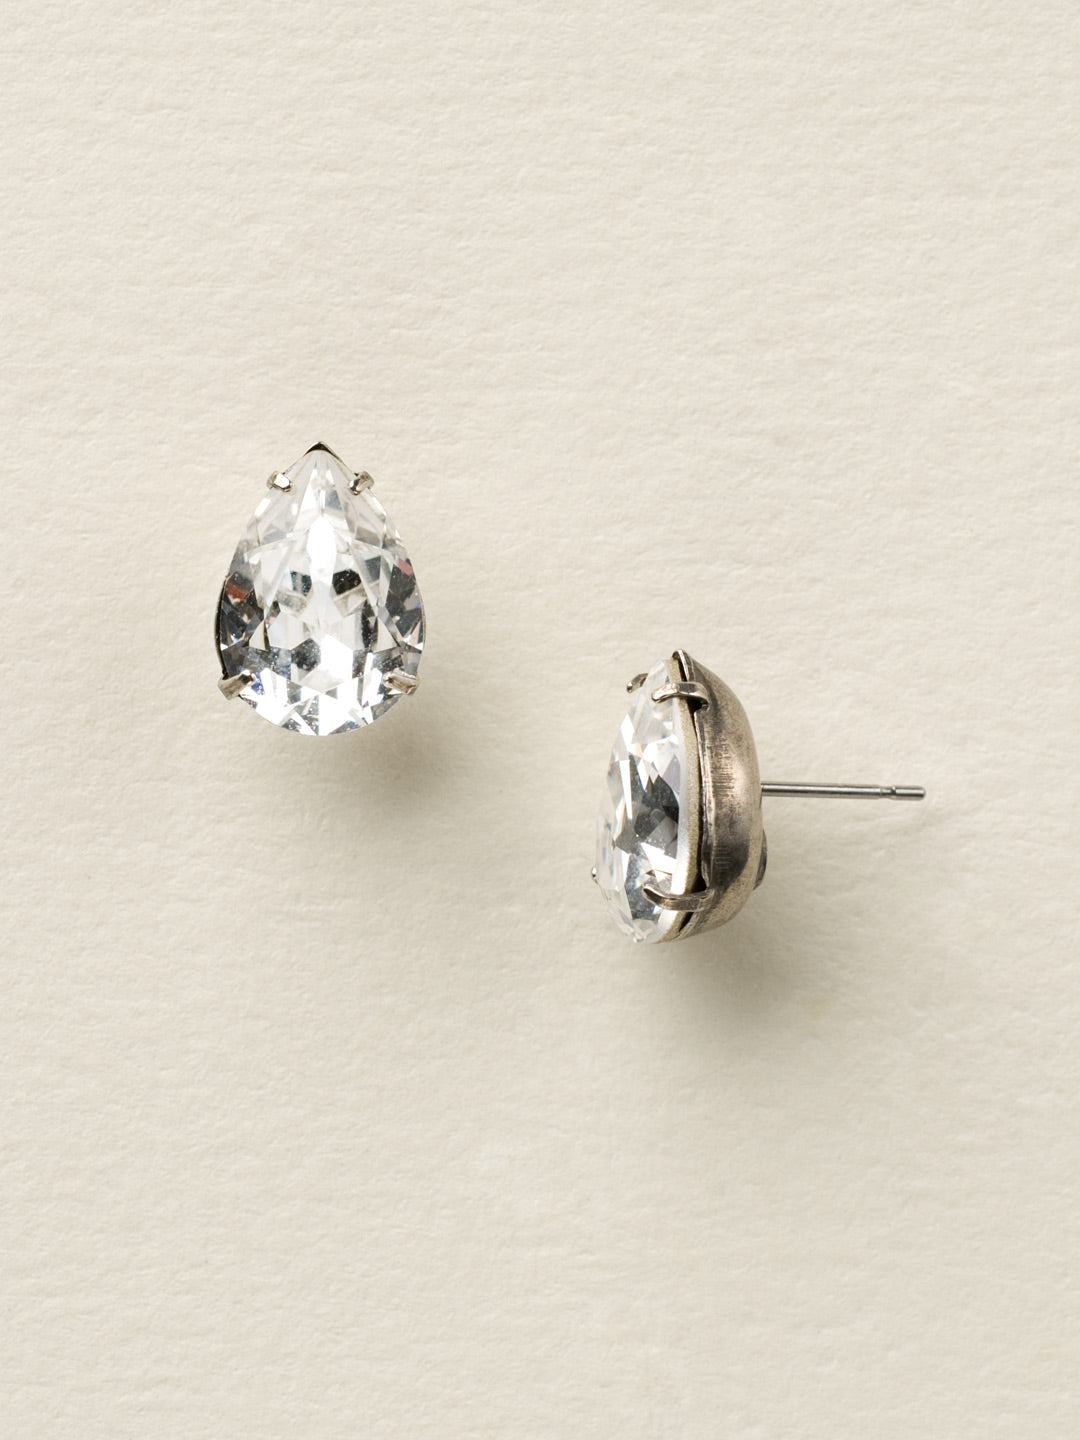 Ginnie Stud Earrings - ECR115ASCCL - <p>A beautiful basic stud. These classic single teardrop post earrings are perfect for any occasion, especially the everyday look. A timeless treasure that will sparkle season after season. From Sorrelli's Crystal Clear collection in our Antique Silver-tone finish.</p>